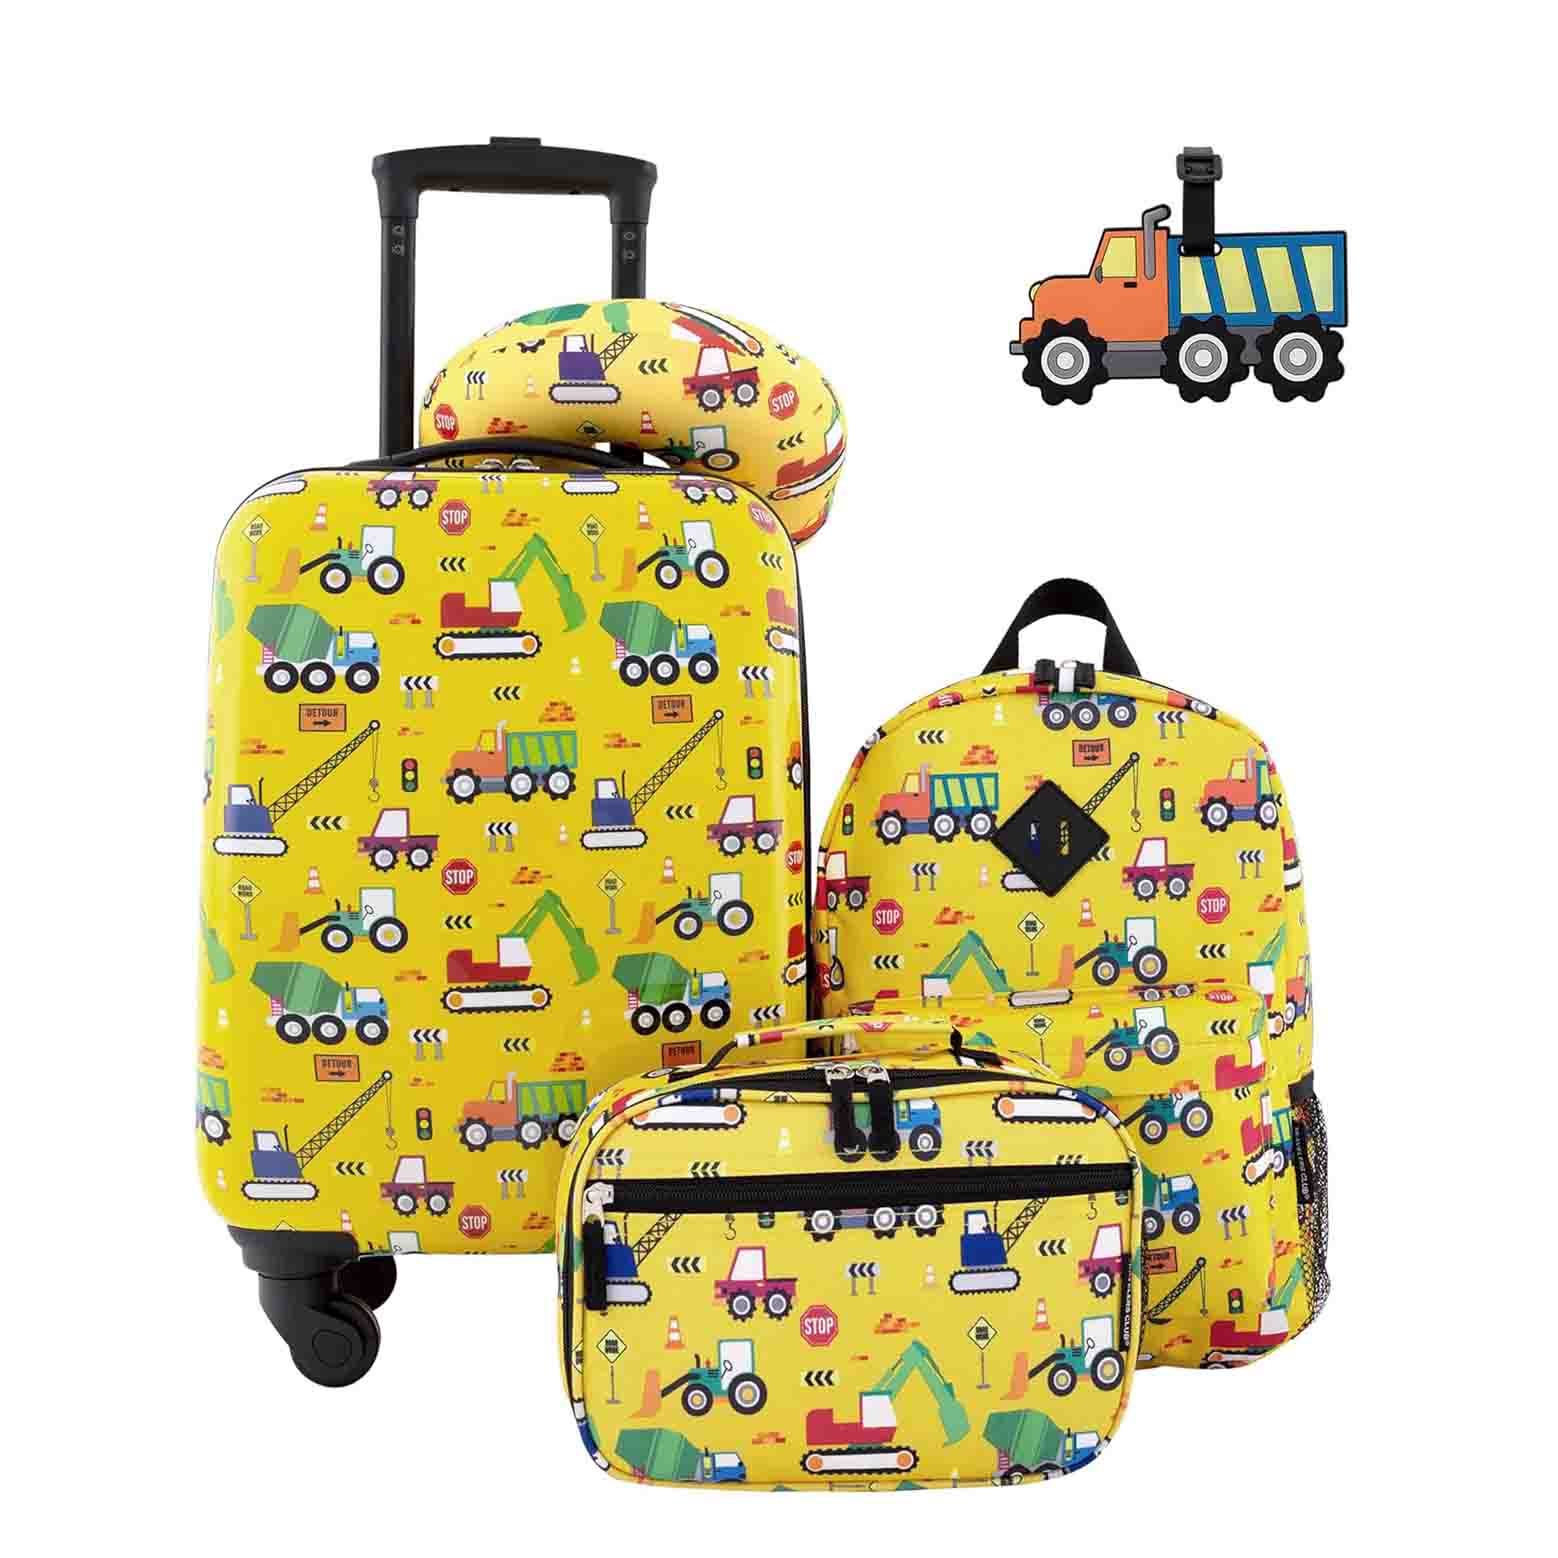 Yellow car 5 Piece Kids' Luggage Set including a suitcase, backpack, lunch bag, neck pillow and luggage tag